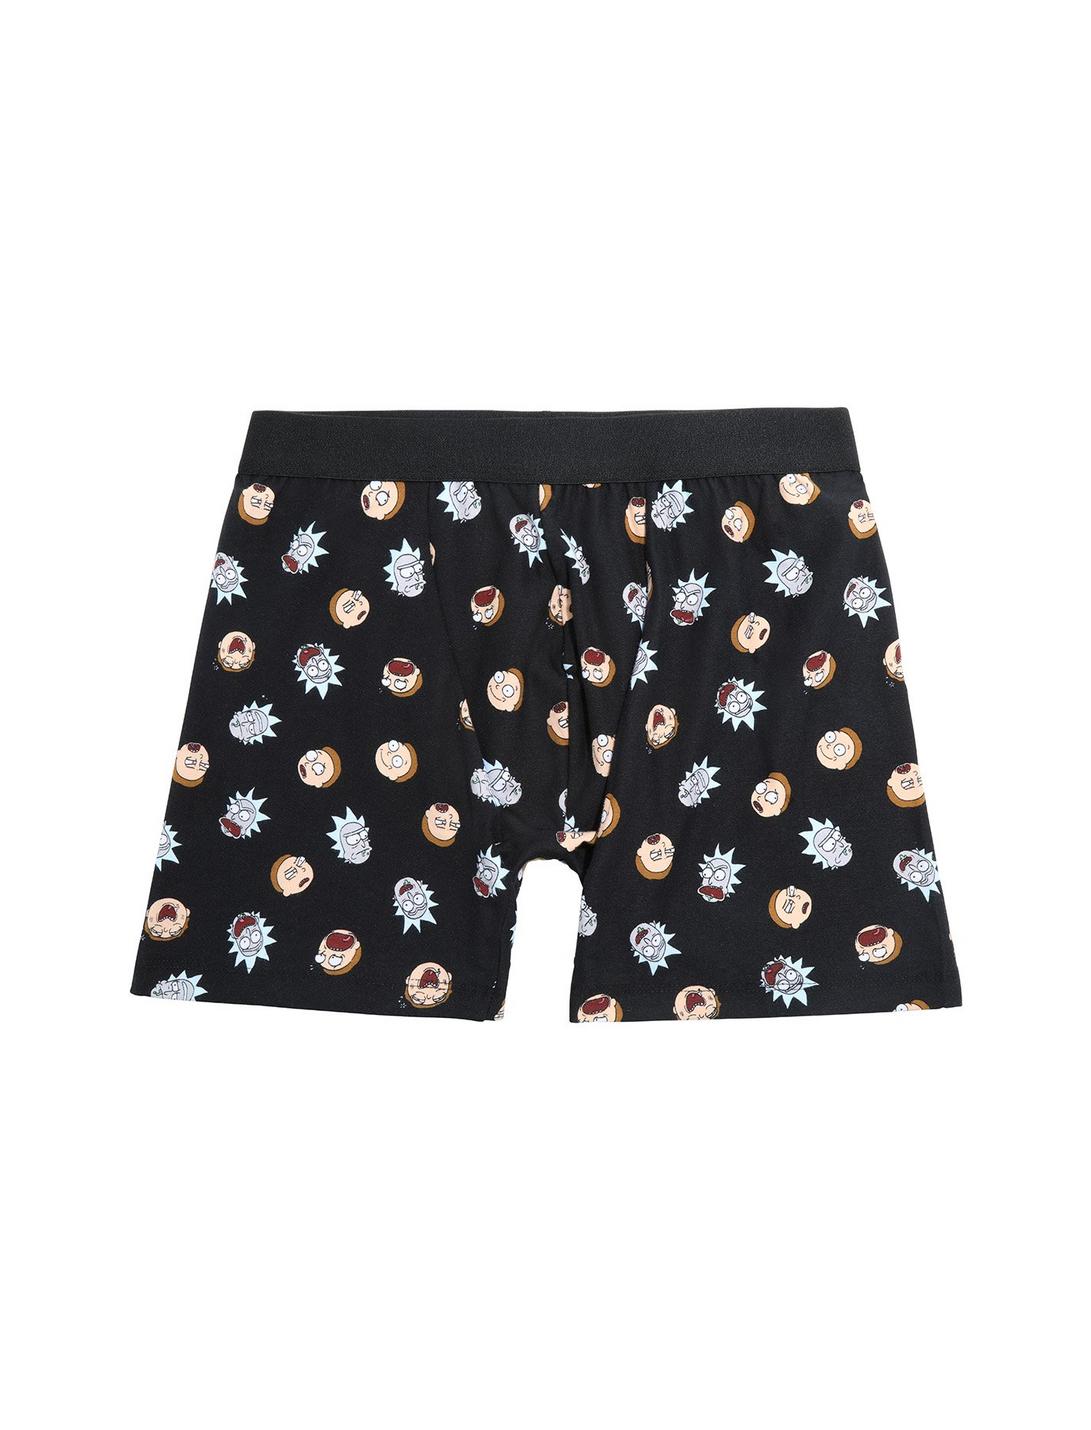 Rick And Morty Heads Toss Print Boxer Briefs, MULTI, hi-res